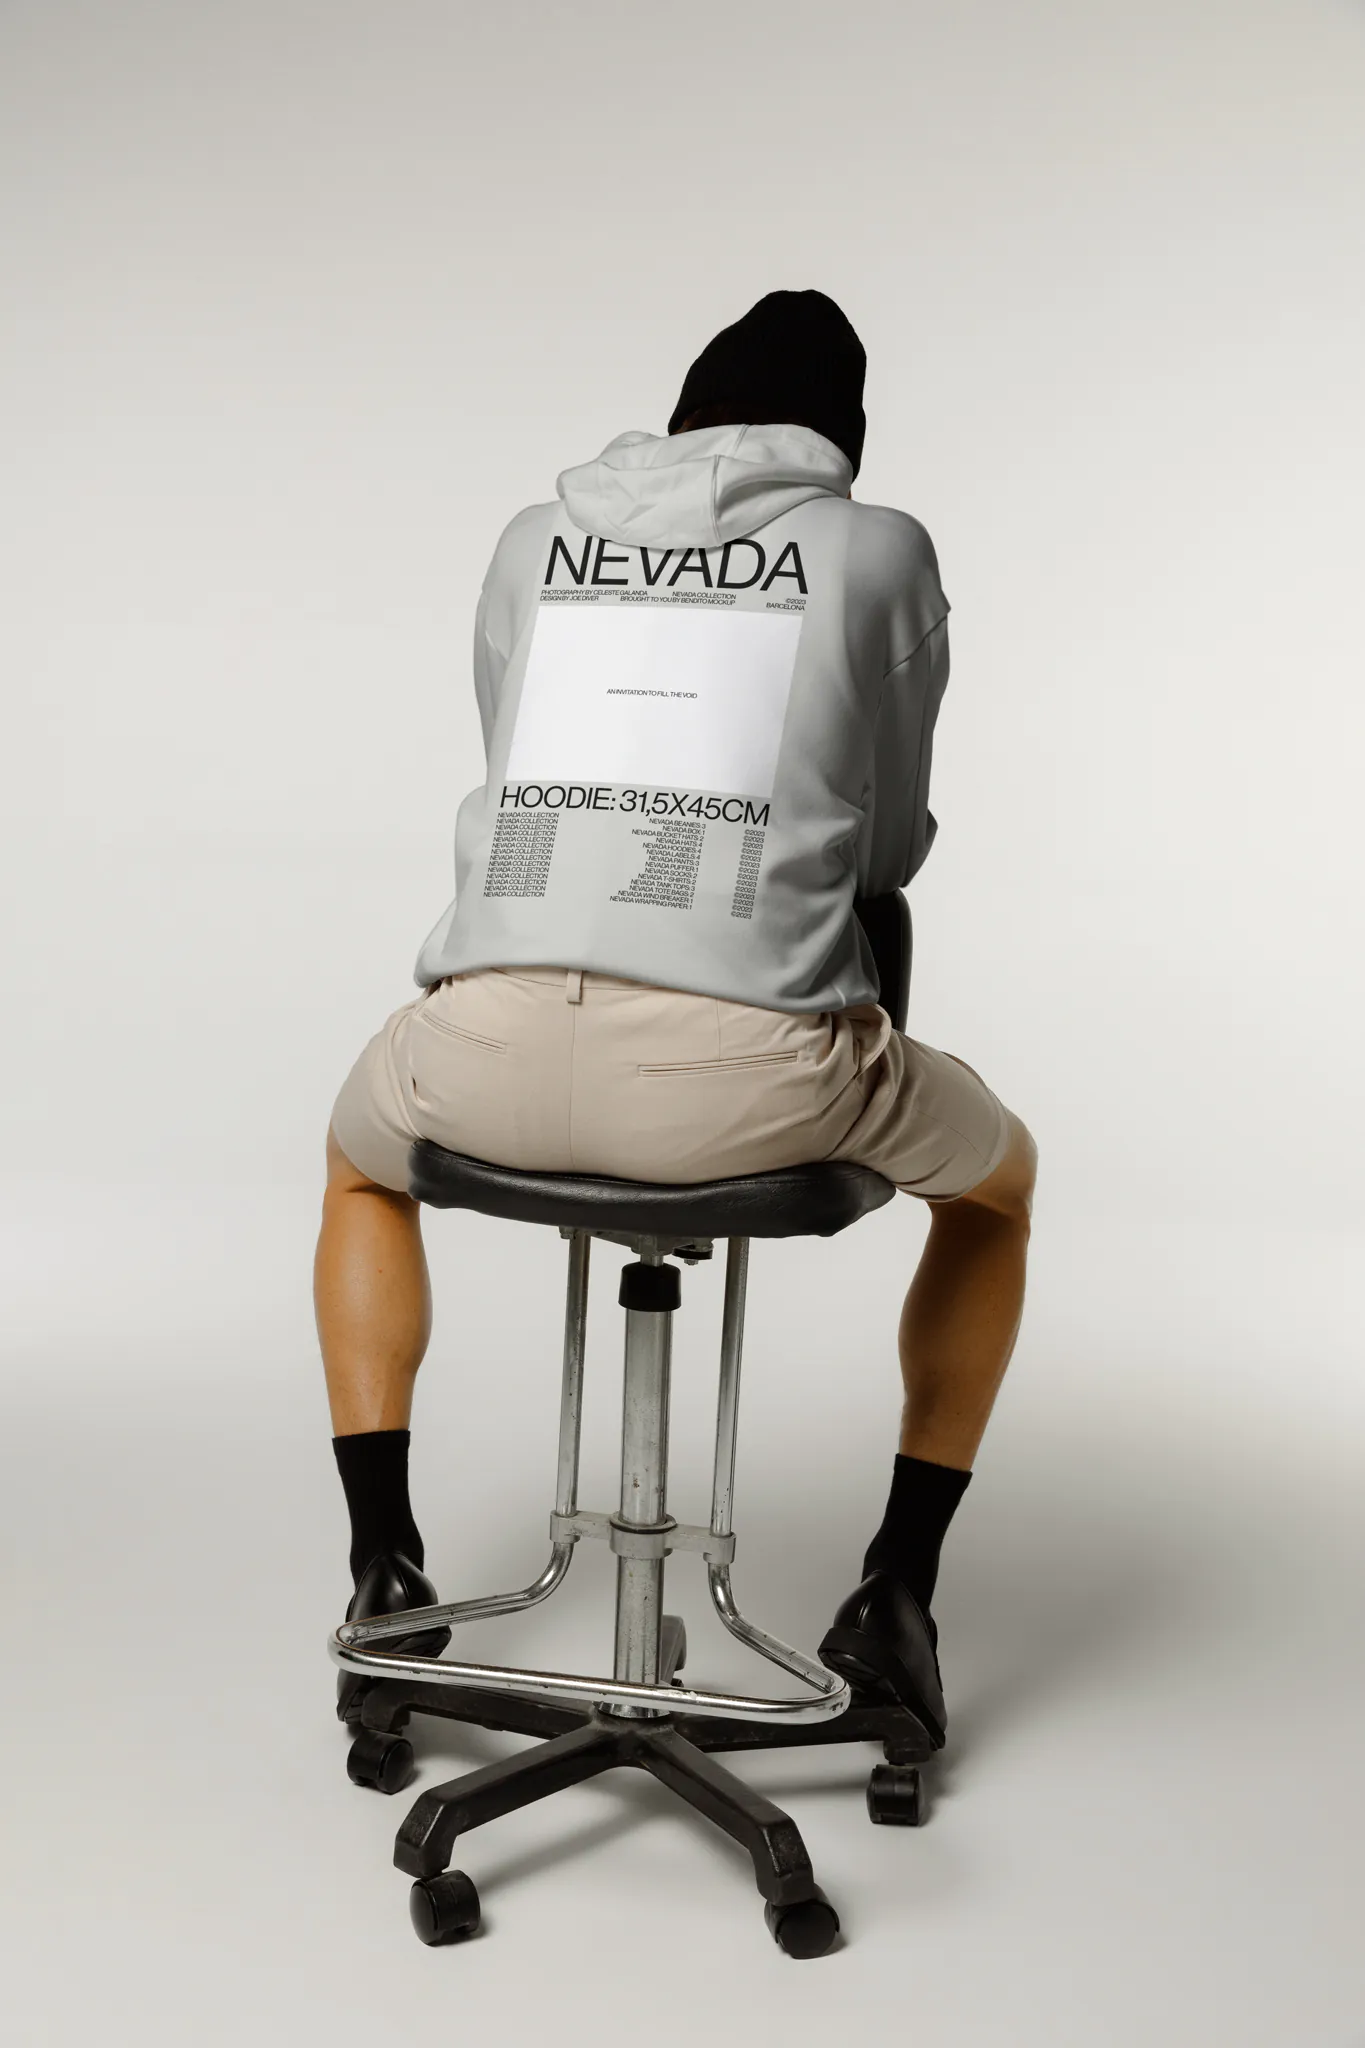 Male sitting on a chair wearing a hoodie mockup, PSD file of a man wearing a hoodie mockup, fashion mockup, hoodie mockup, clothing mockup.